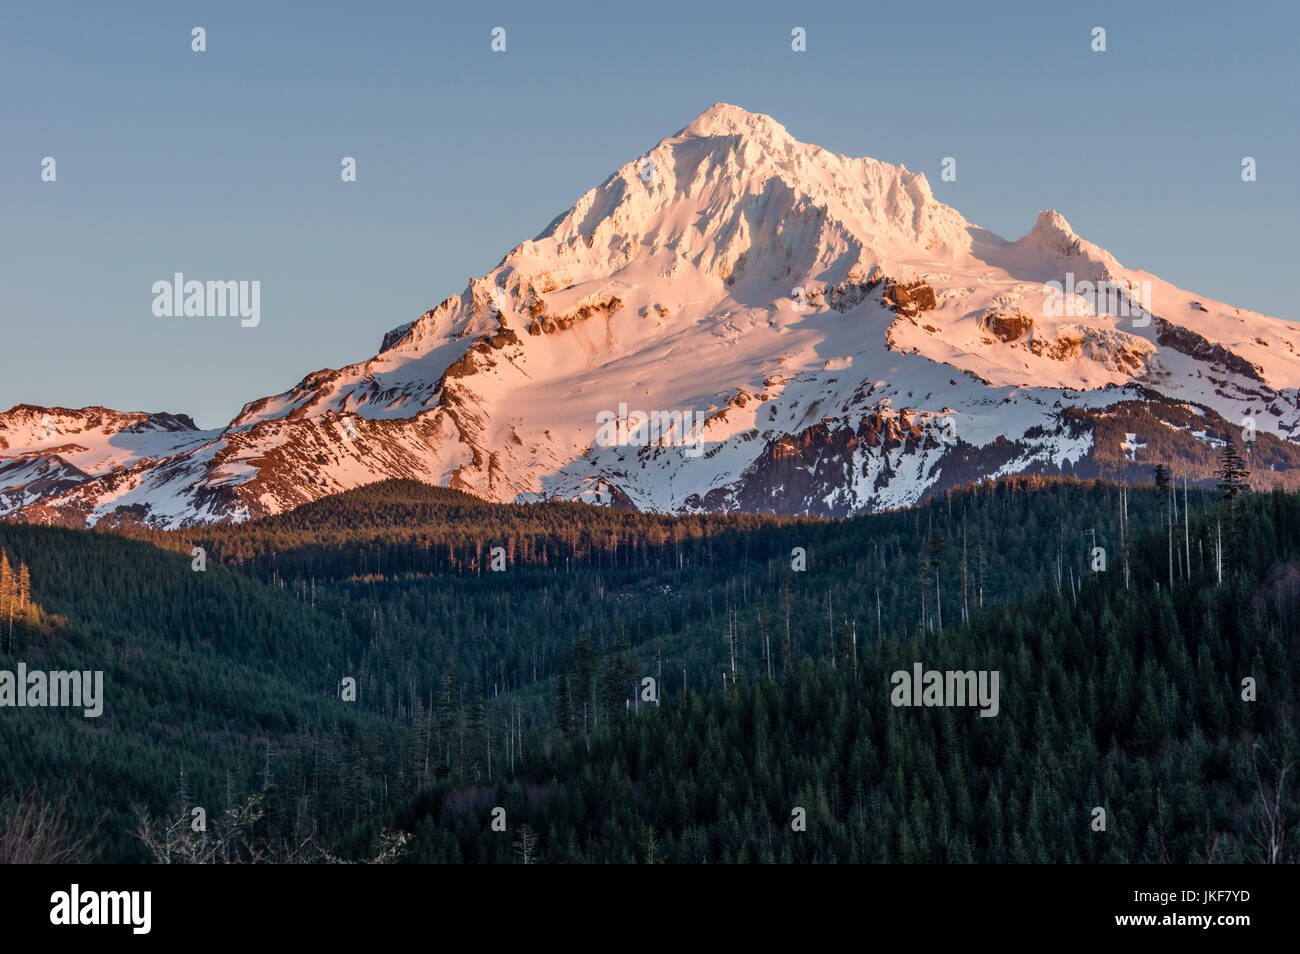 Mount Hood with snow cover and forested foot hills Stock Photo